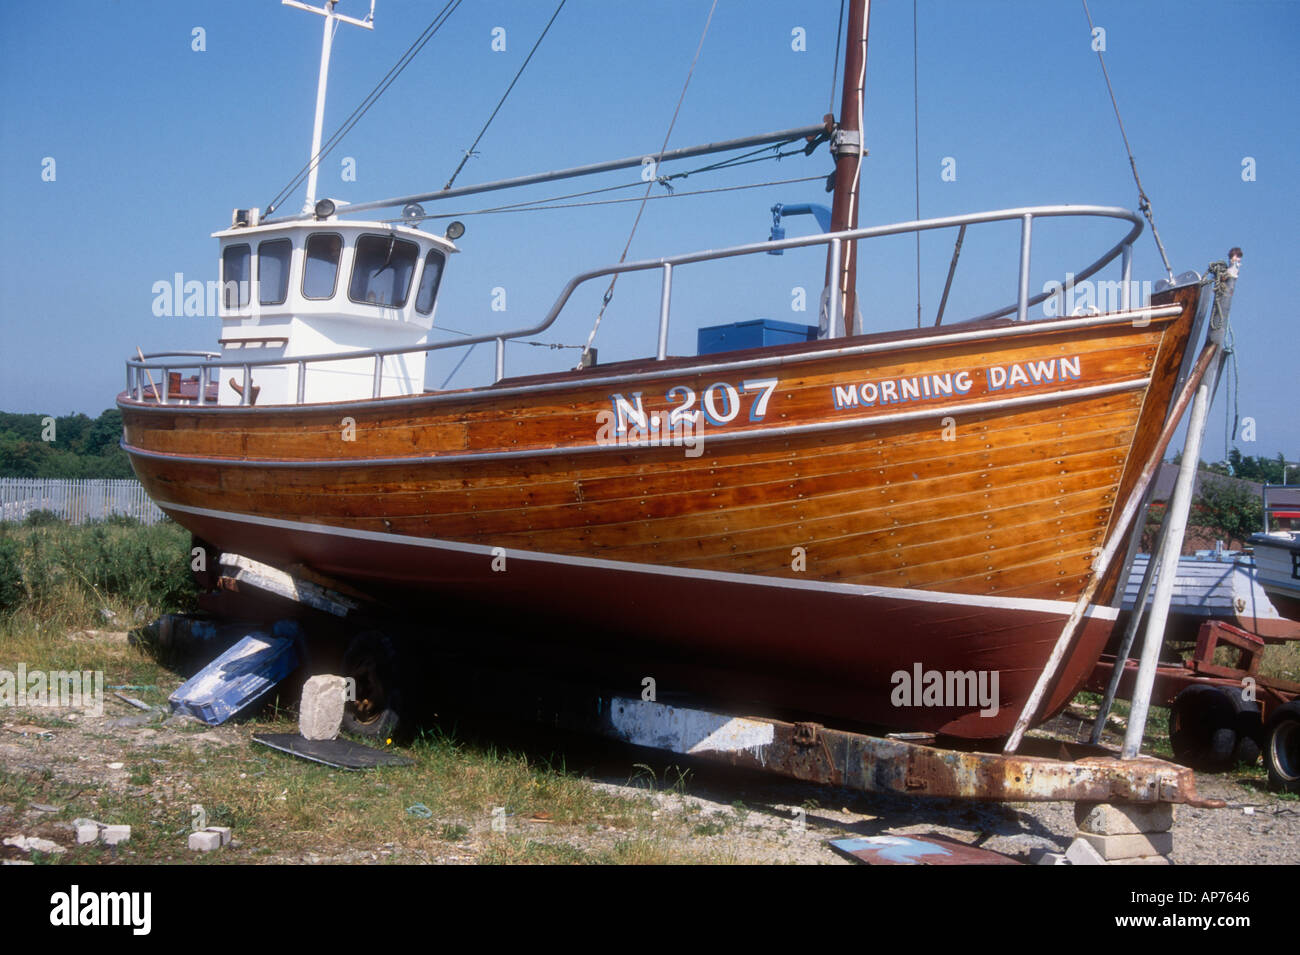 wooden fishing boat stock photos - download 33,883 images